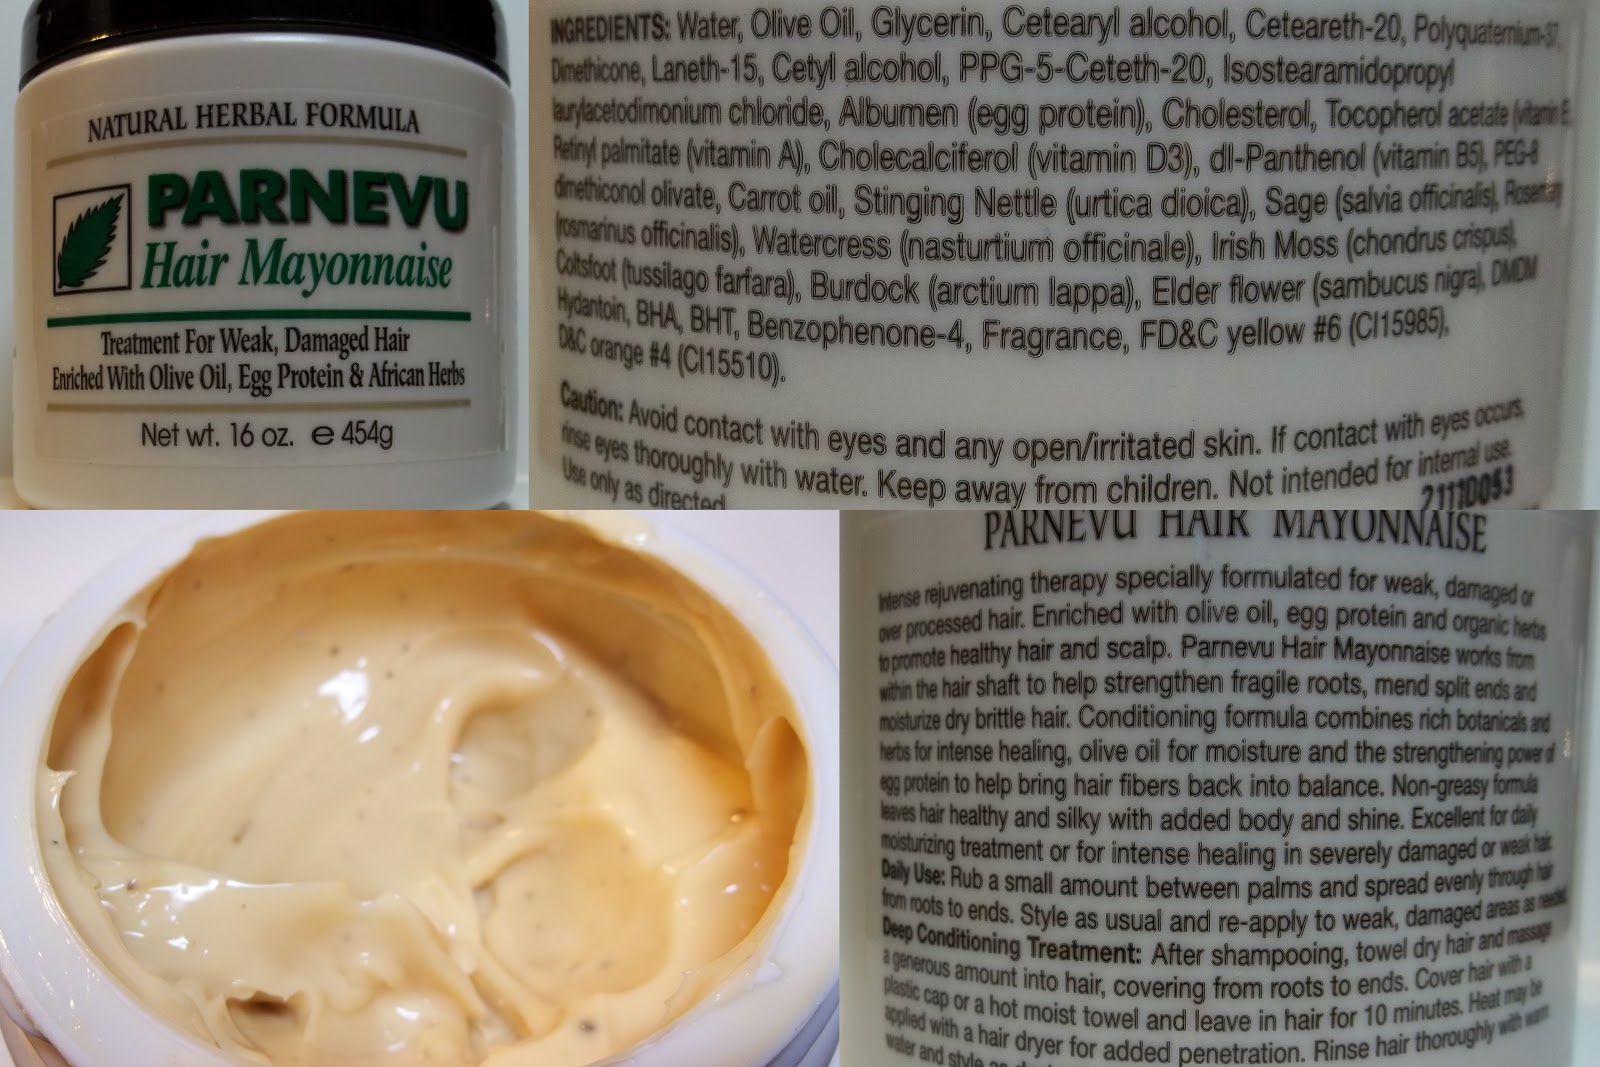 REVIEW: Parnevu Product Reviews - Shades of Beauty, Inc.